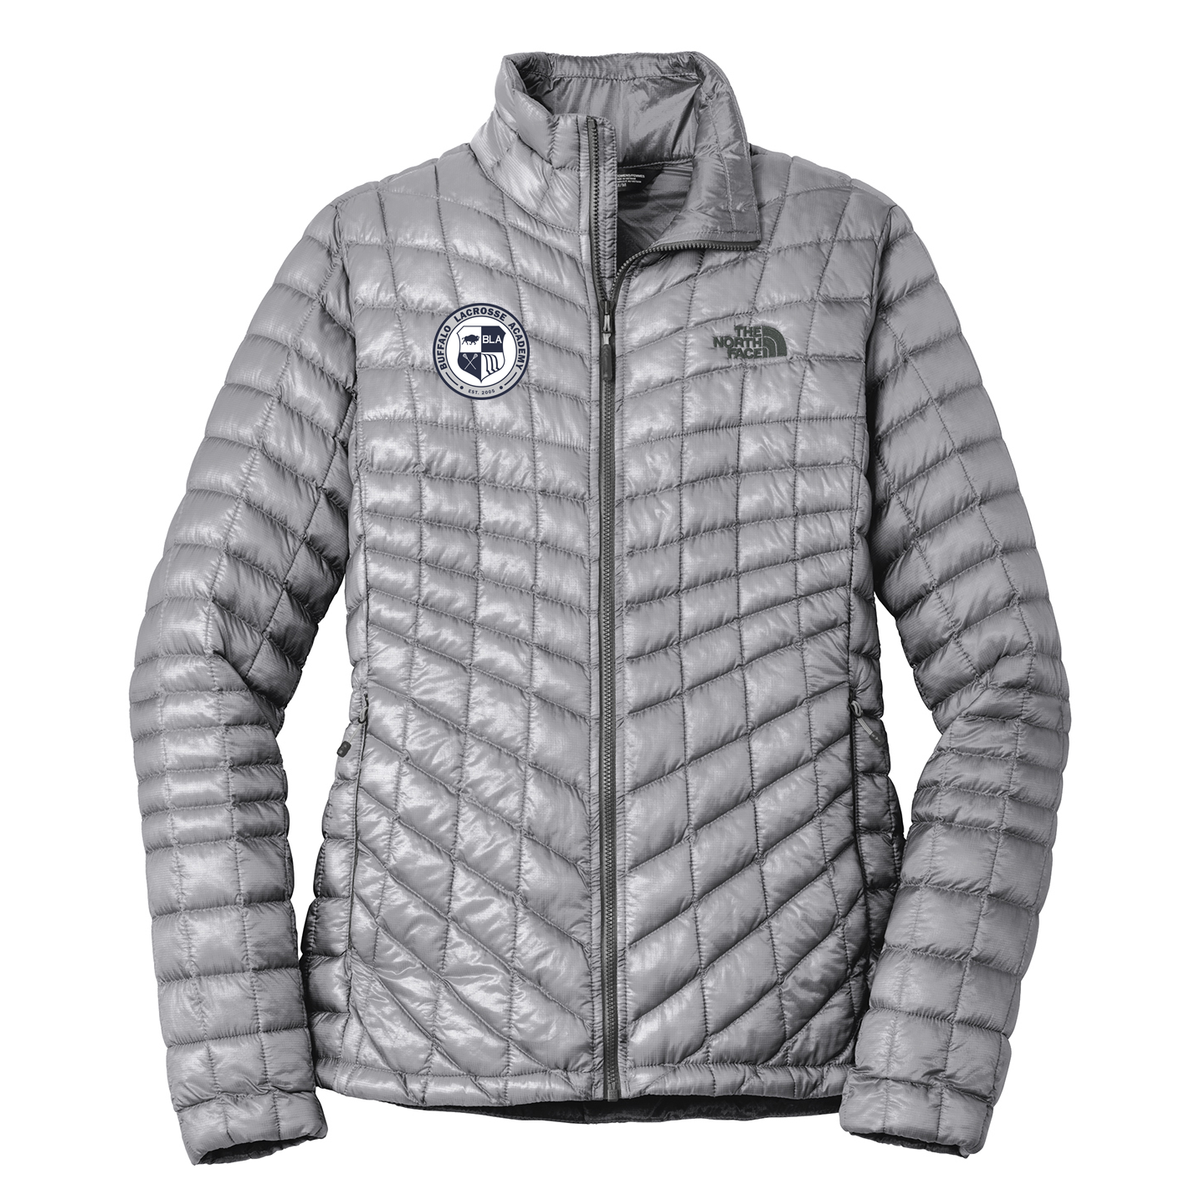 BLA The North Face Ladies ThermoBall Jacket